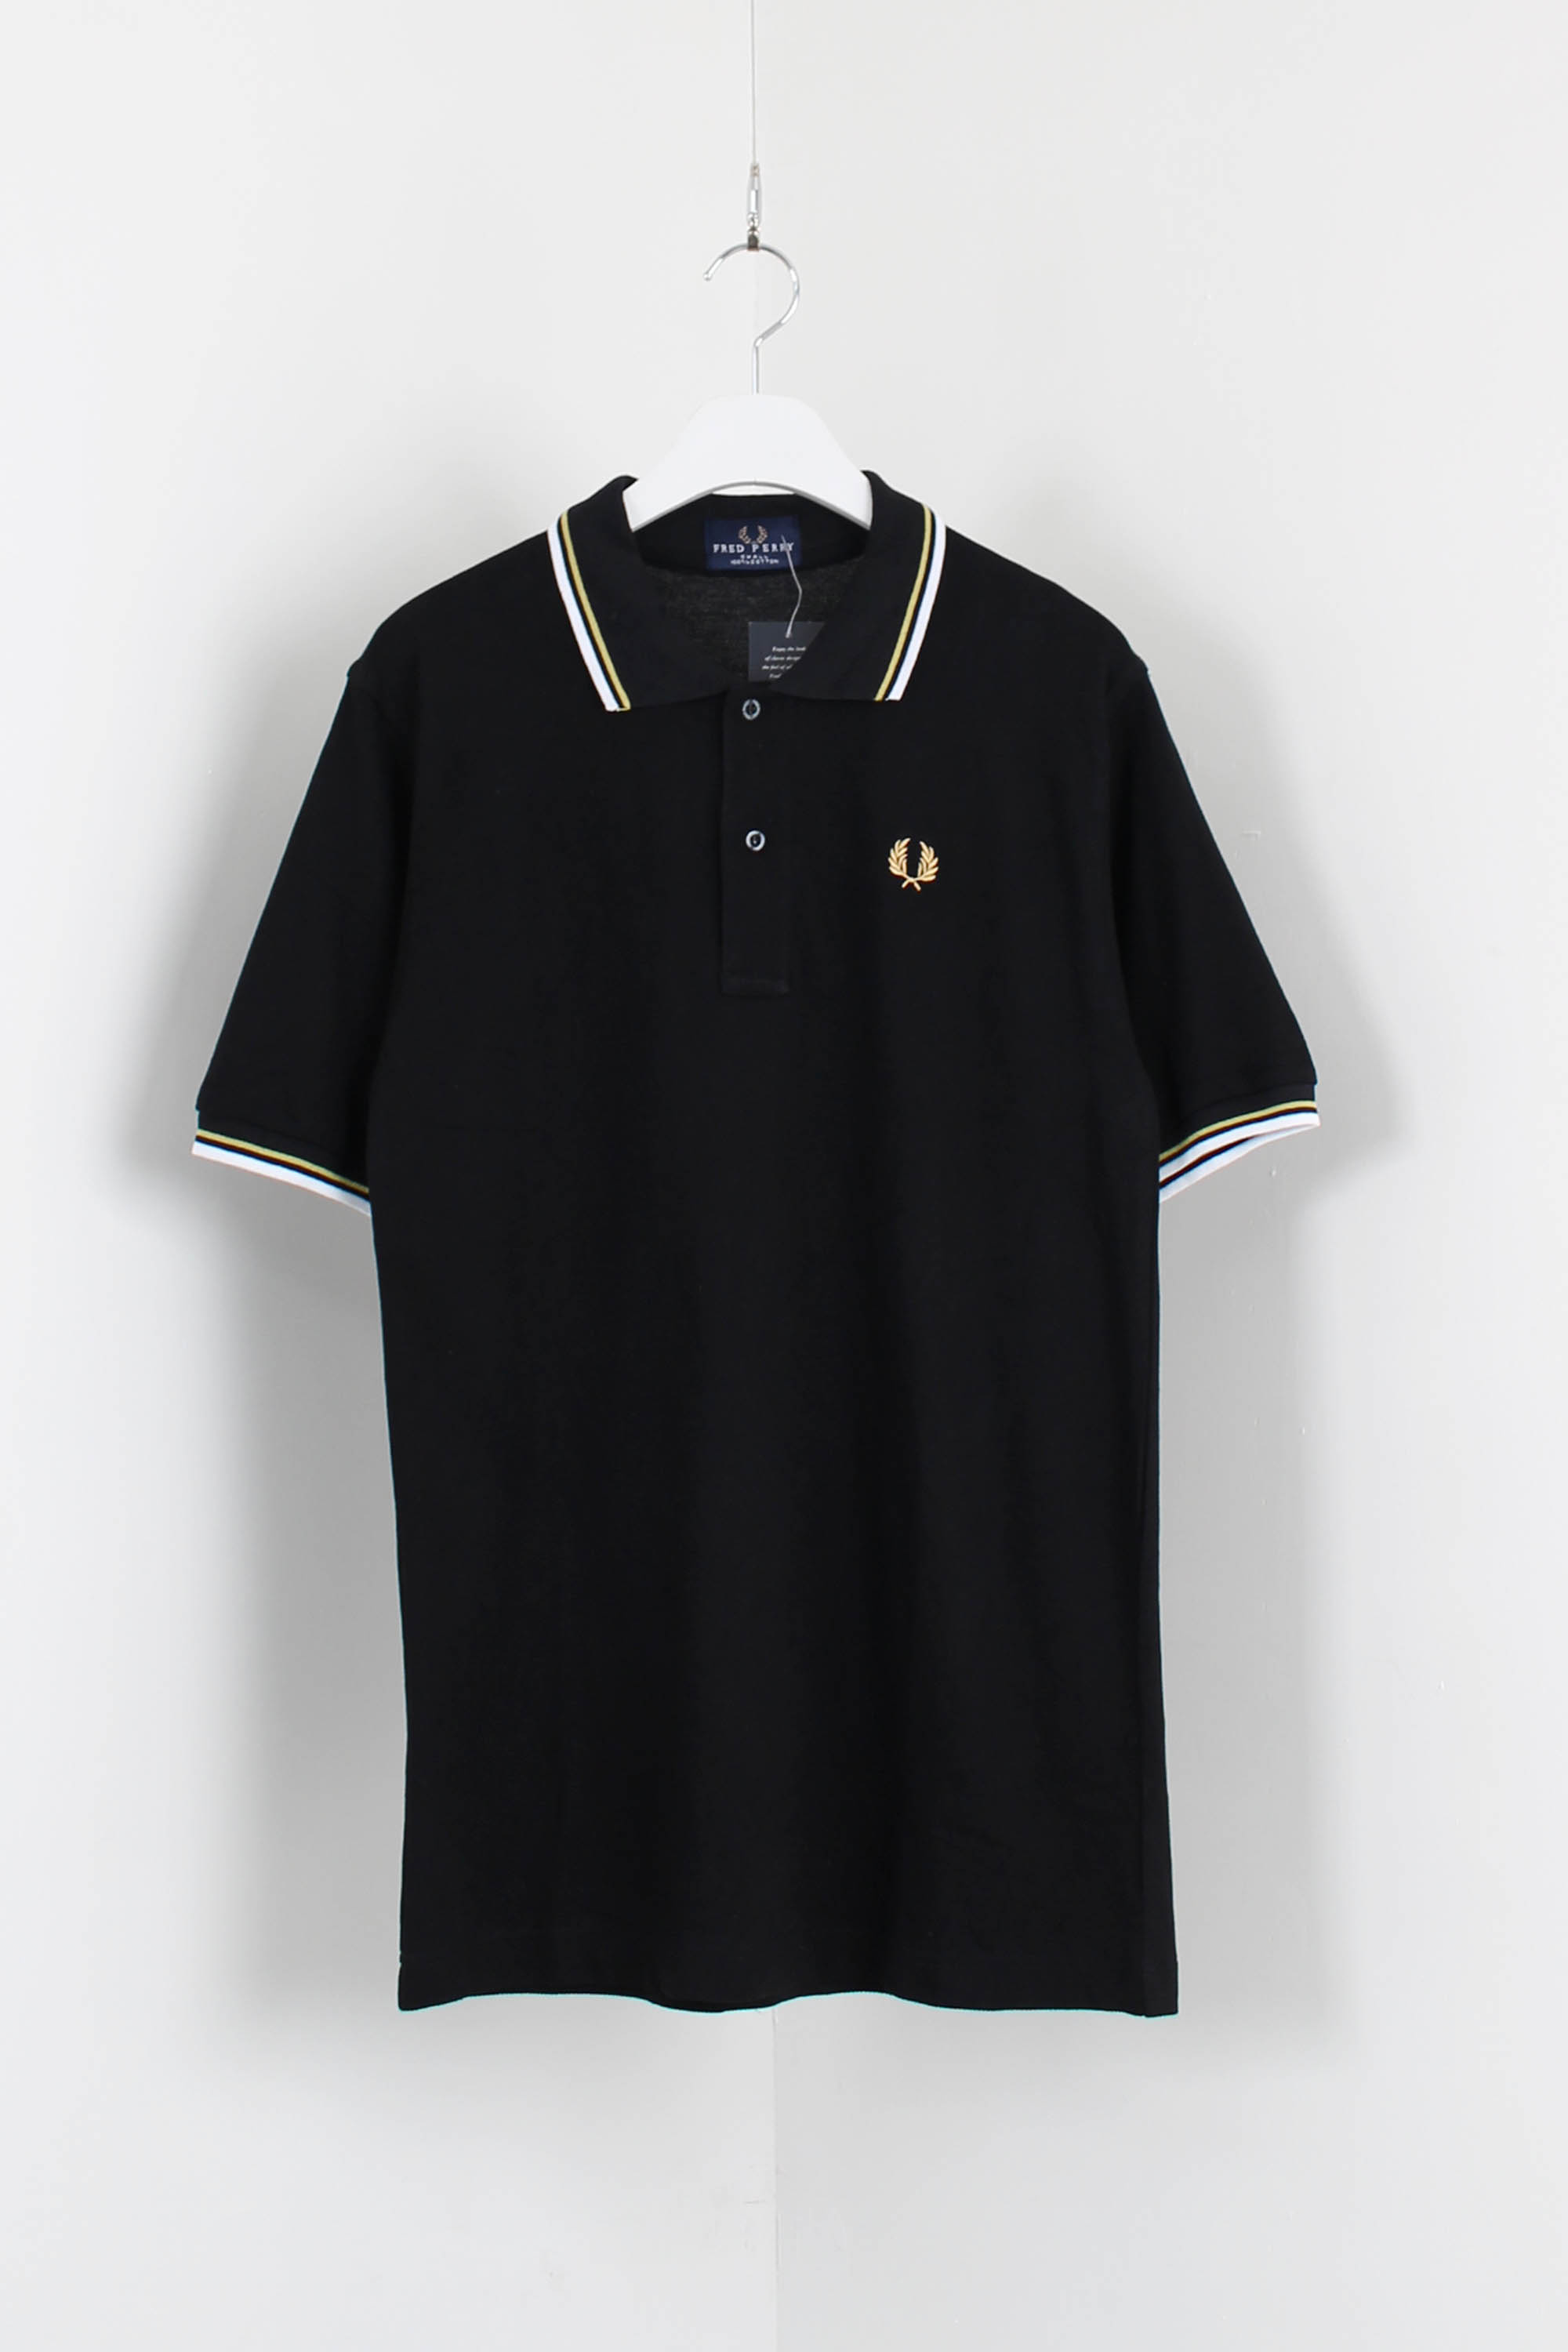 FRED PERRY pique shirt